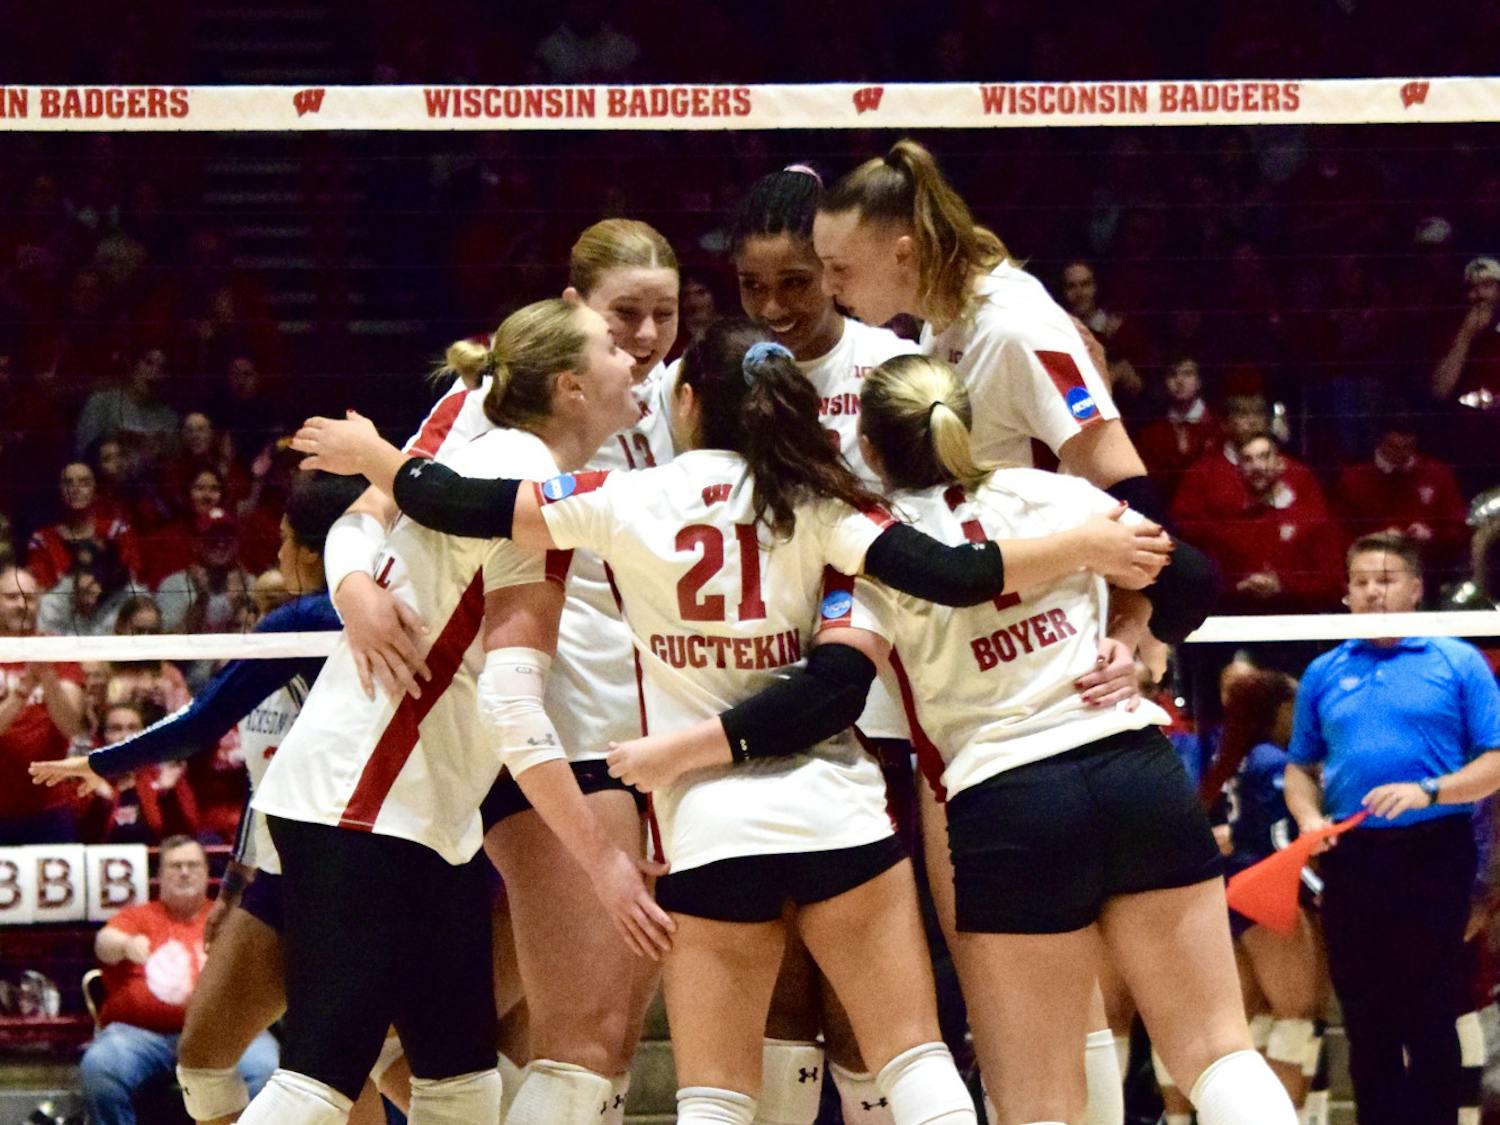 PHOTOS: In the NCAA First Round, Badgers Volleyball sweep the Jackson State Tigers, 3-0